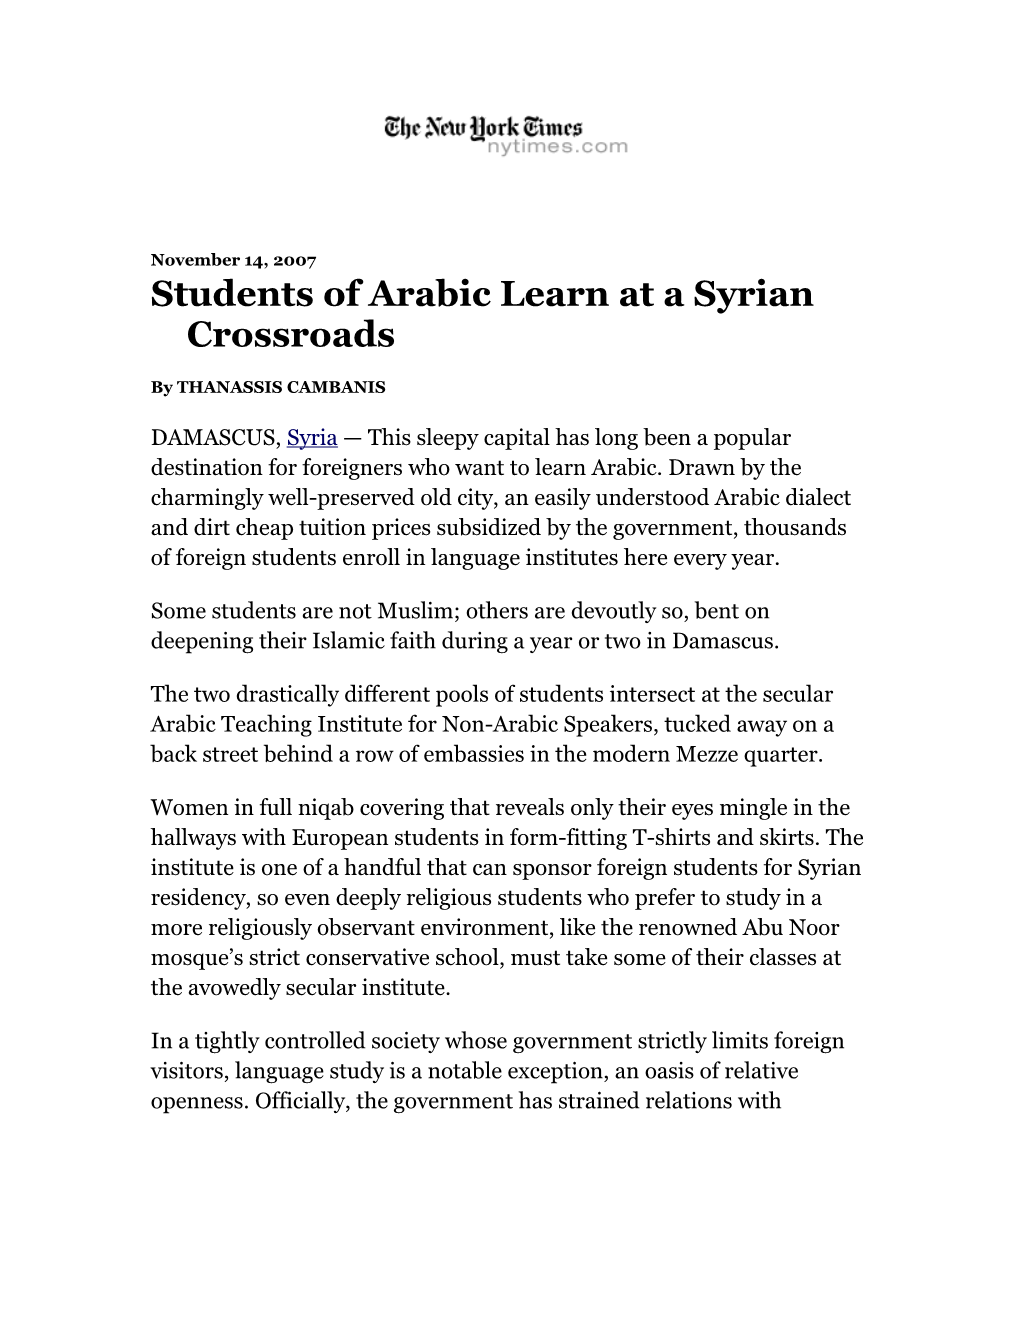 Students of Arabic Learn at a Syrian Crossroads